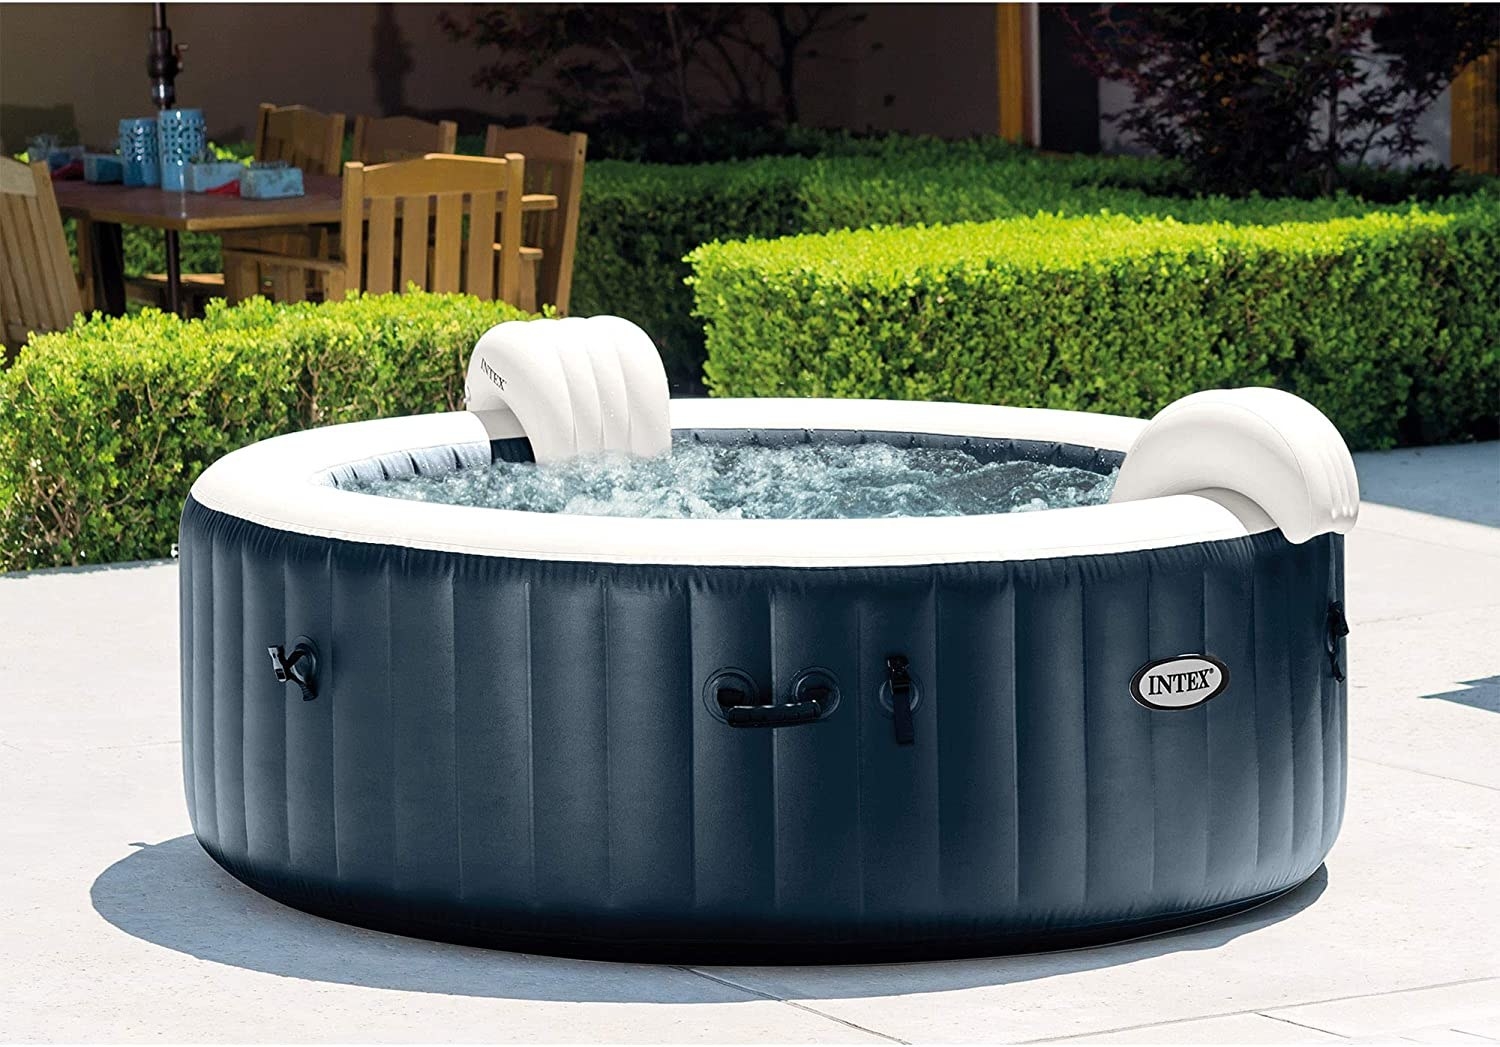 The circular hot tub with two backrests